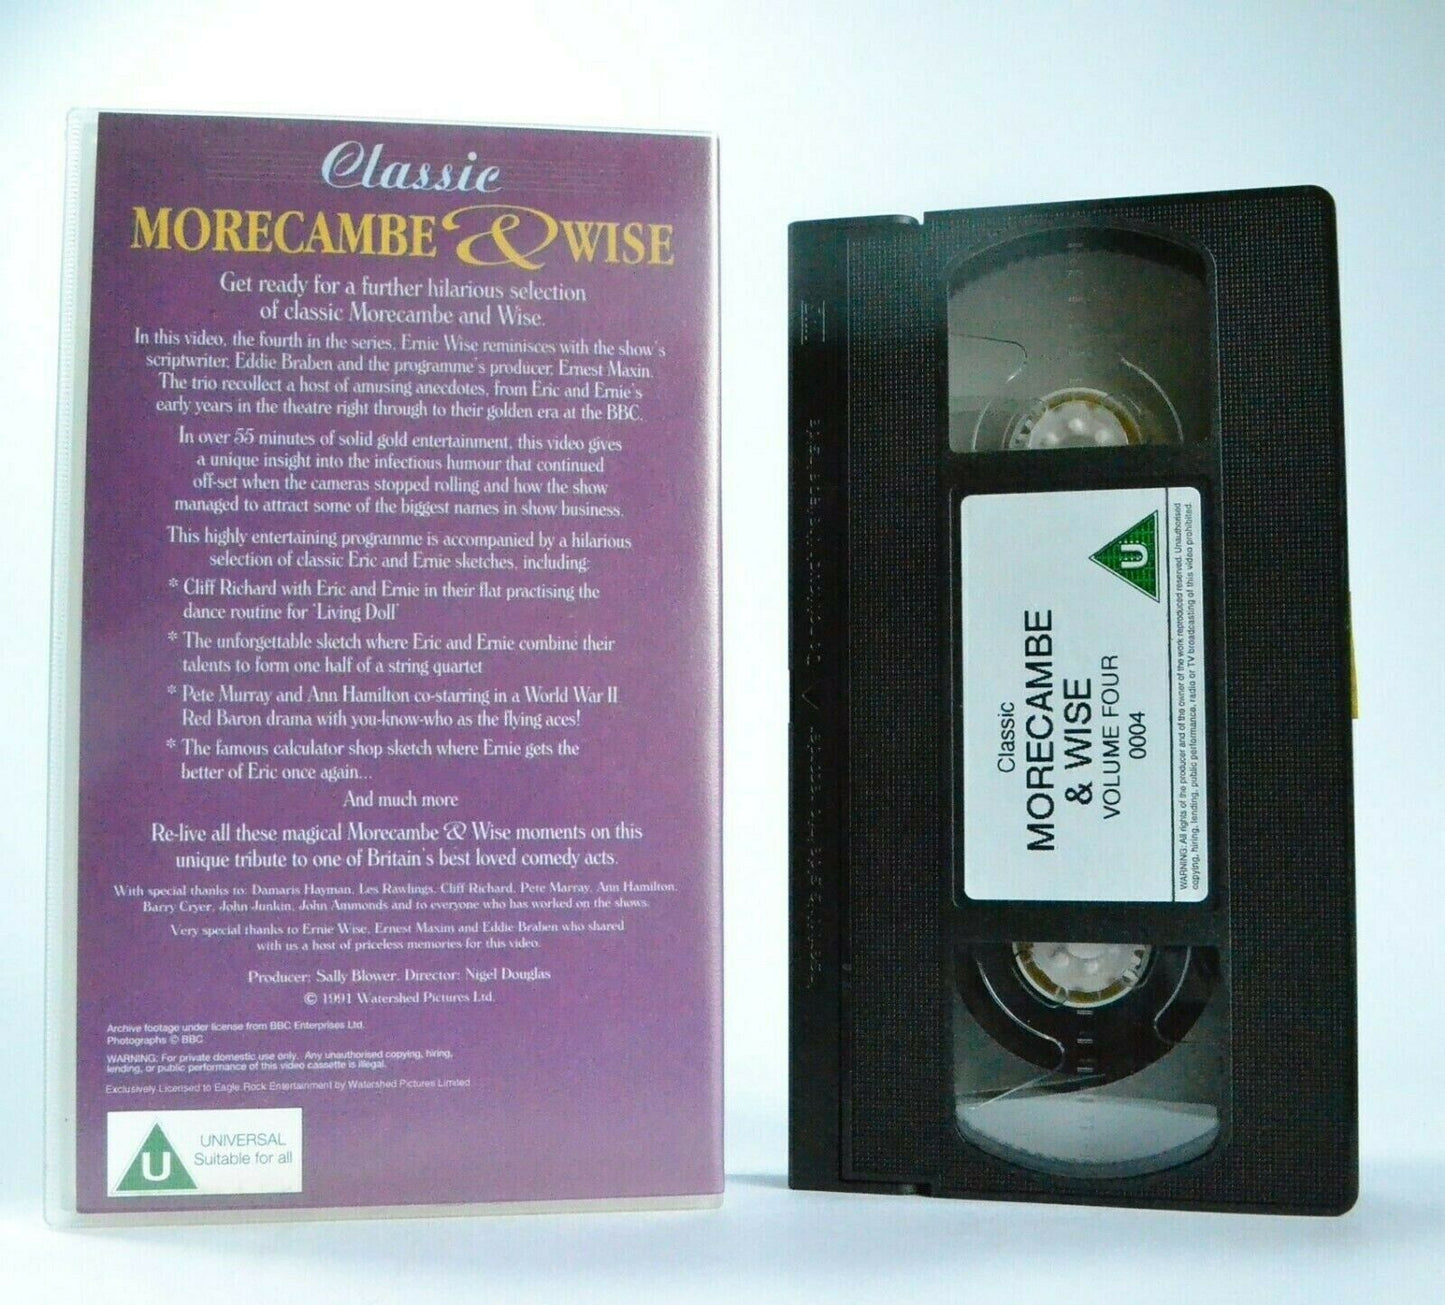 Classic Morecambe And Wise: Volume 4 - BBC TV Comedy Show - The Best Of - VHS-